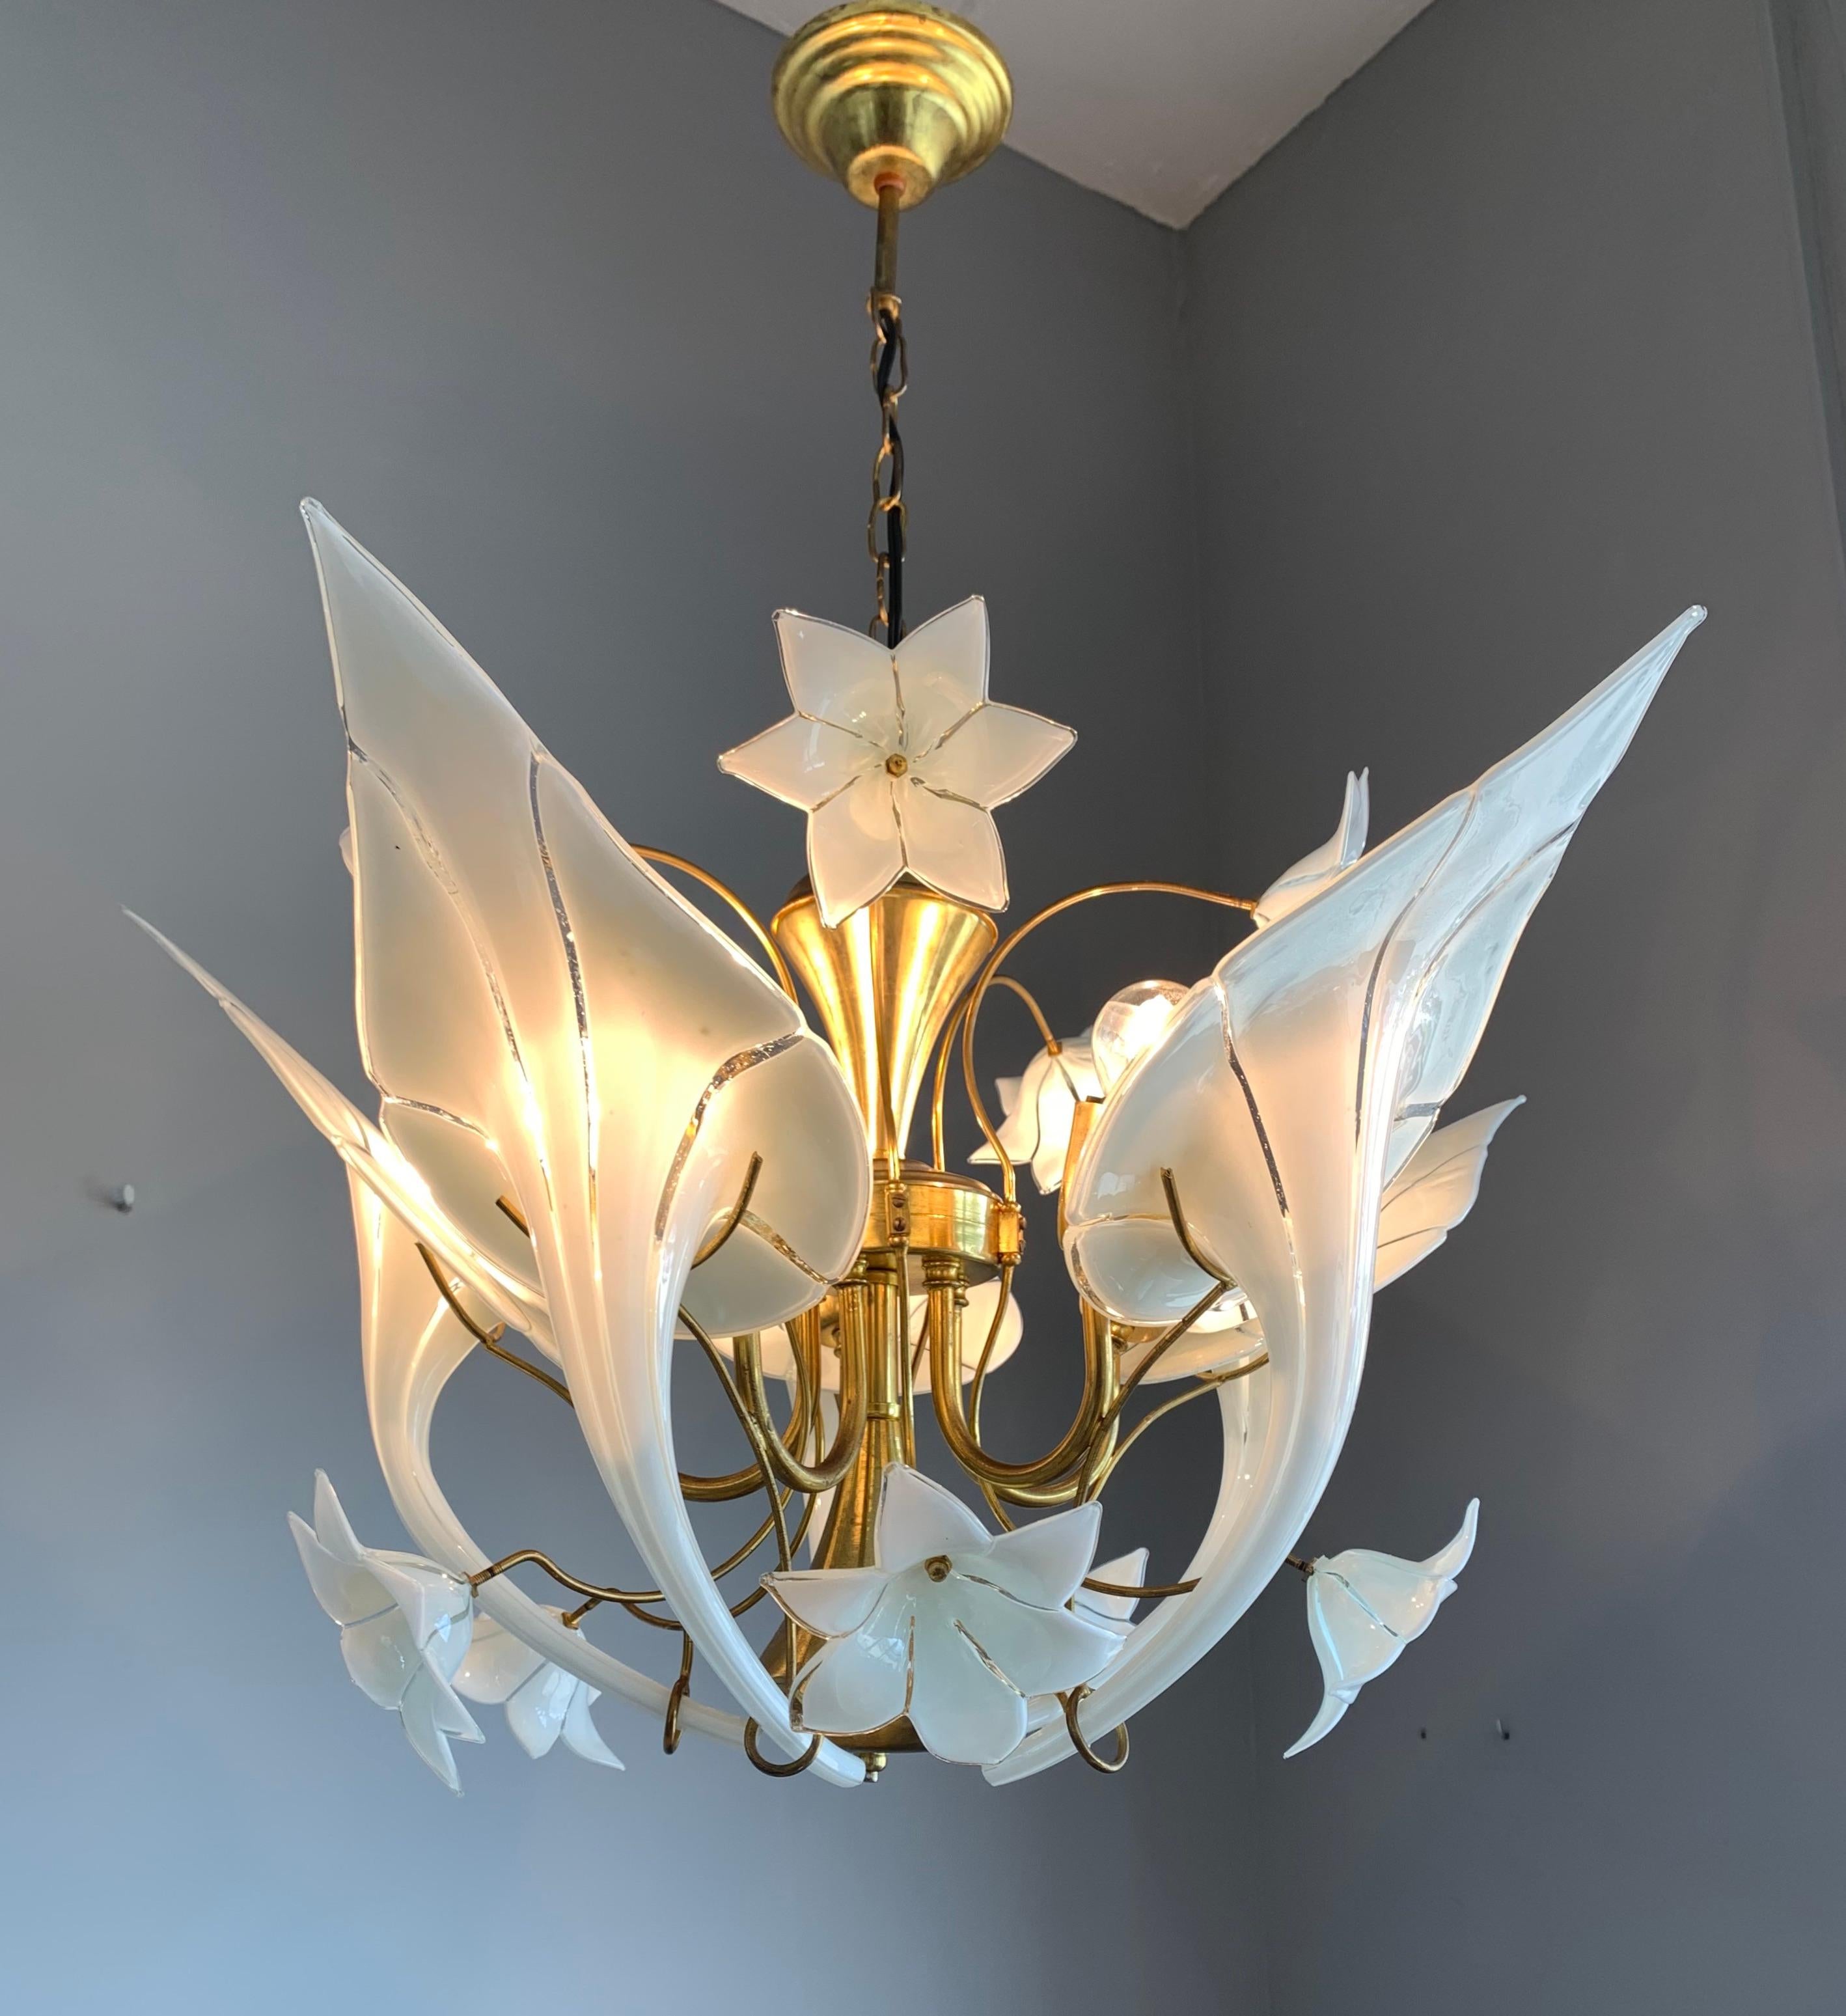 Hand-Crafted Midcentury Italian Murano Chandelier w. Stunning Mouthblown Glass Flower Shades